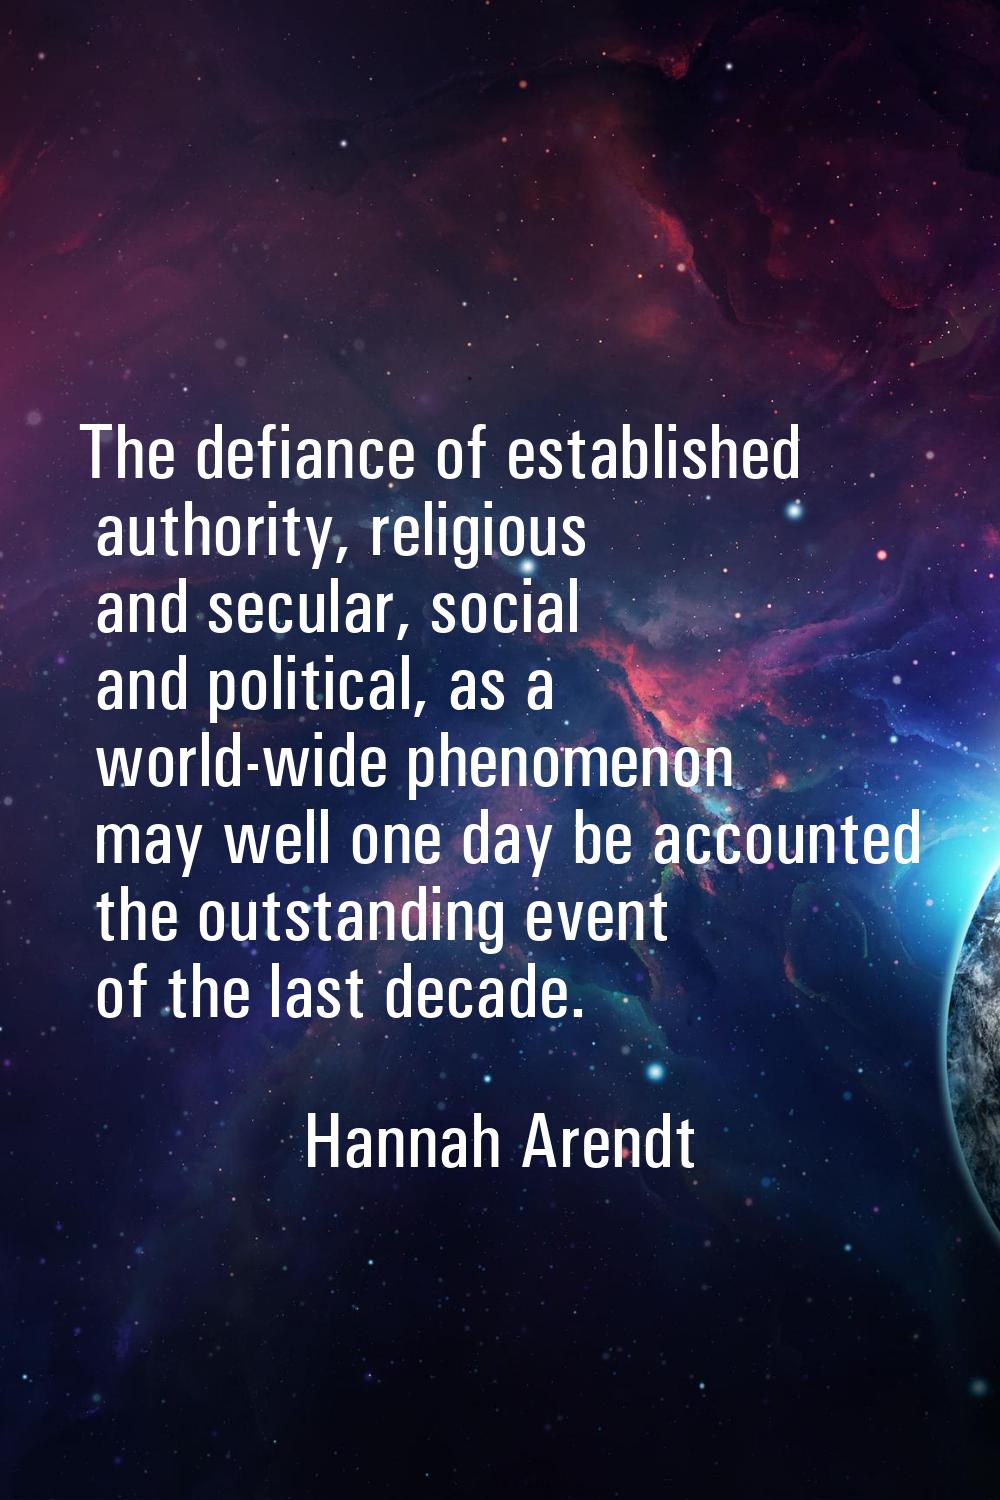 The defiance of established authority, religious and secular, social and political, as a world-wide